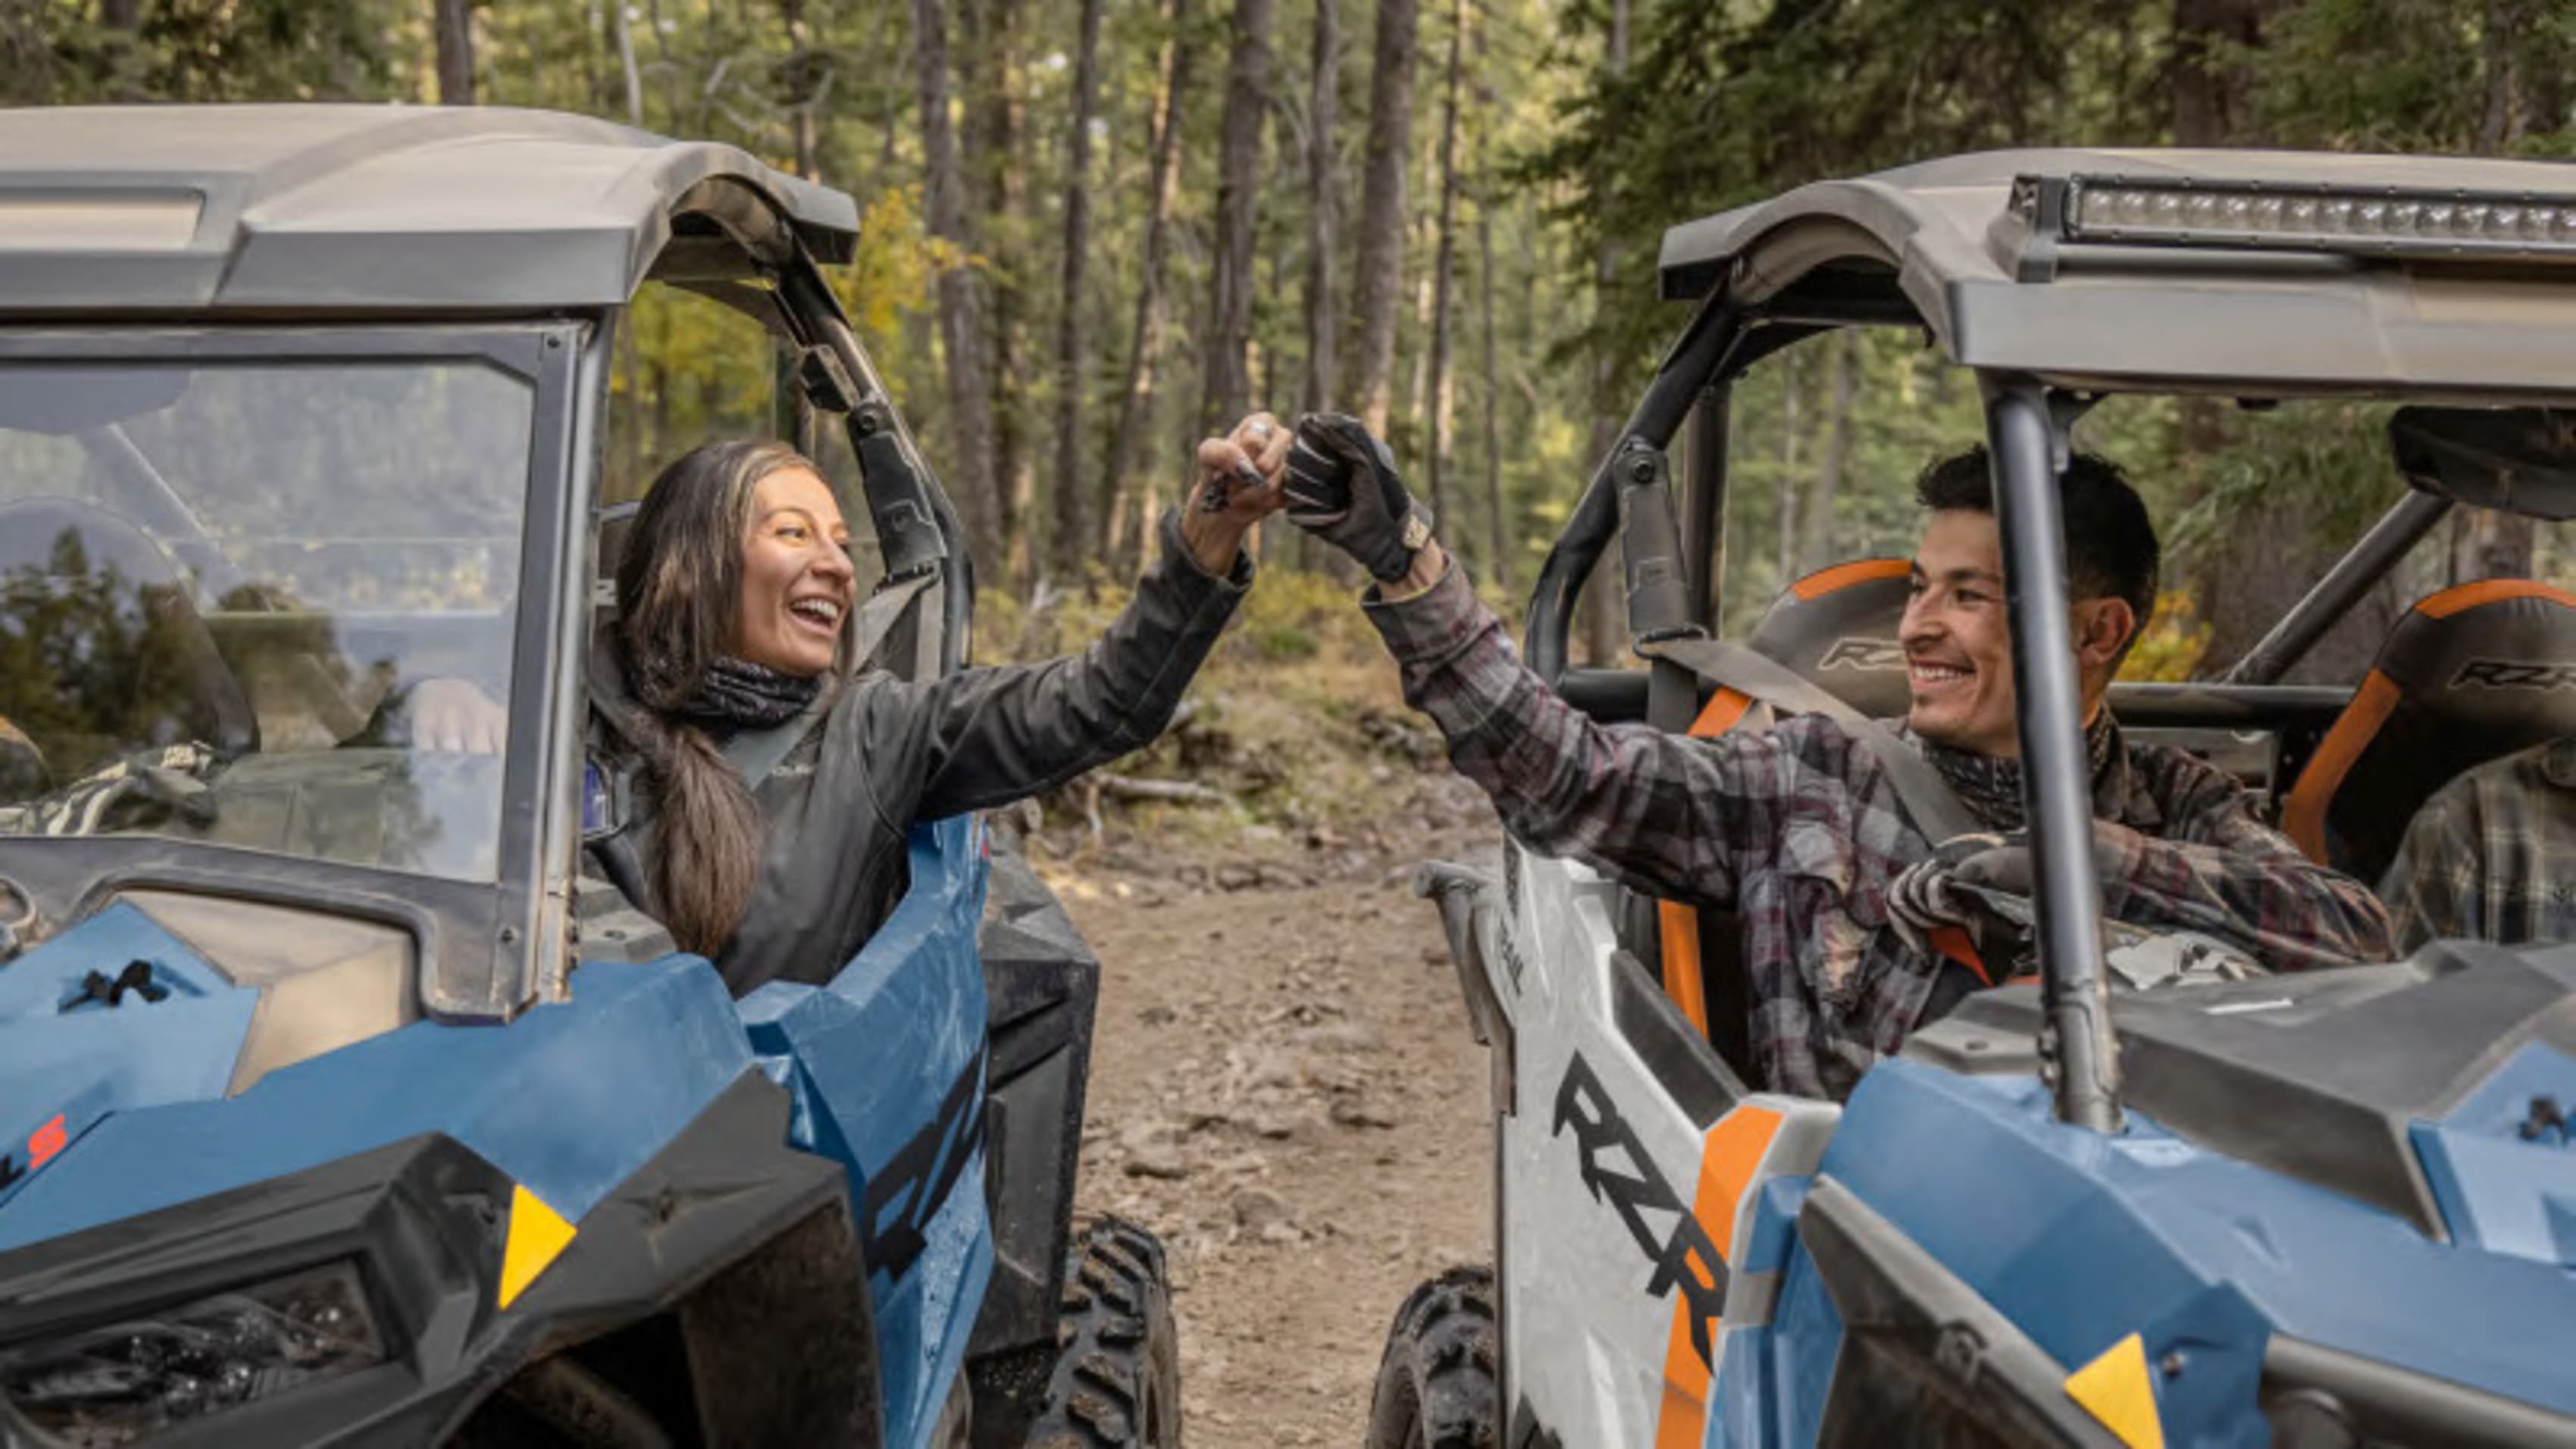 Joyful couple doing a fist bump while seated in Polaris RZR vehicles on a forest trail, signifying teamwork and fun on an off-road excursion.